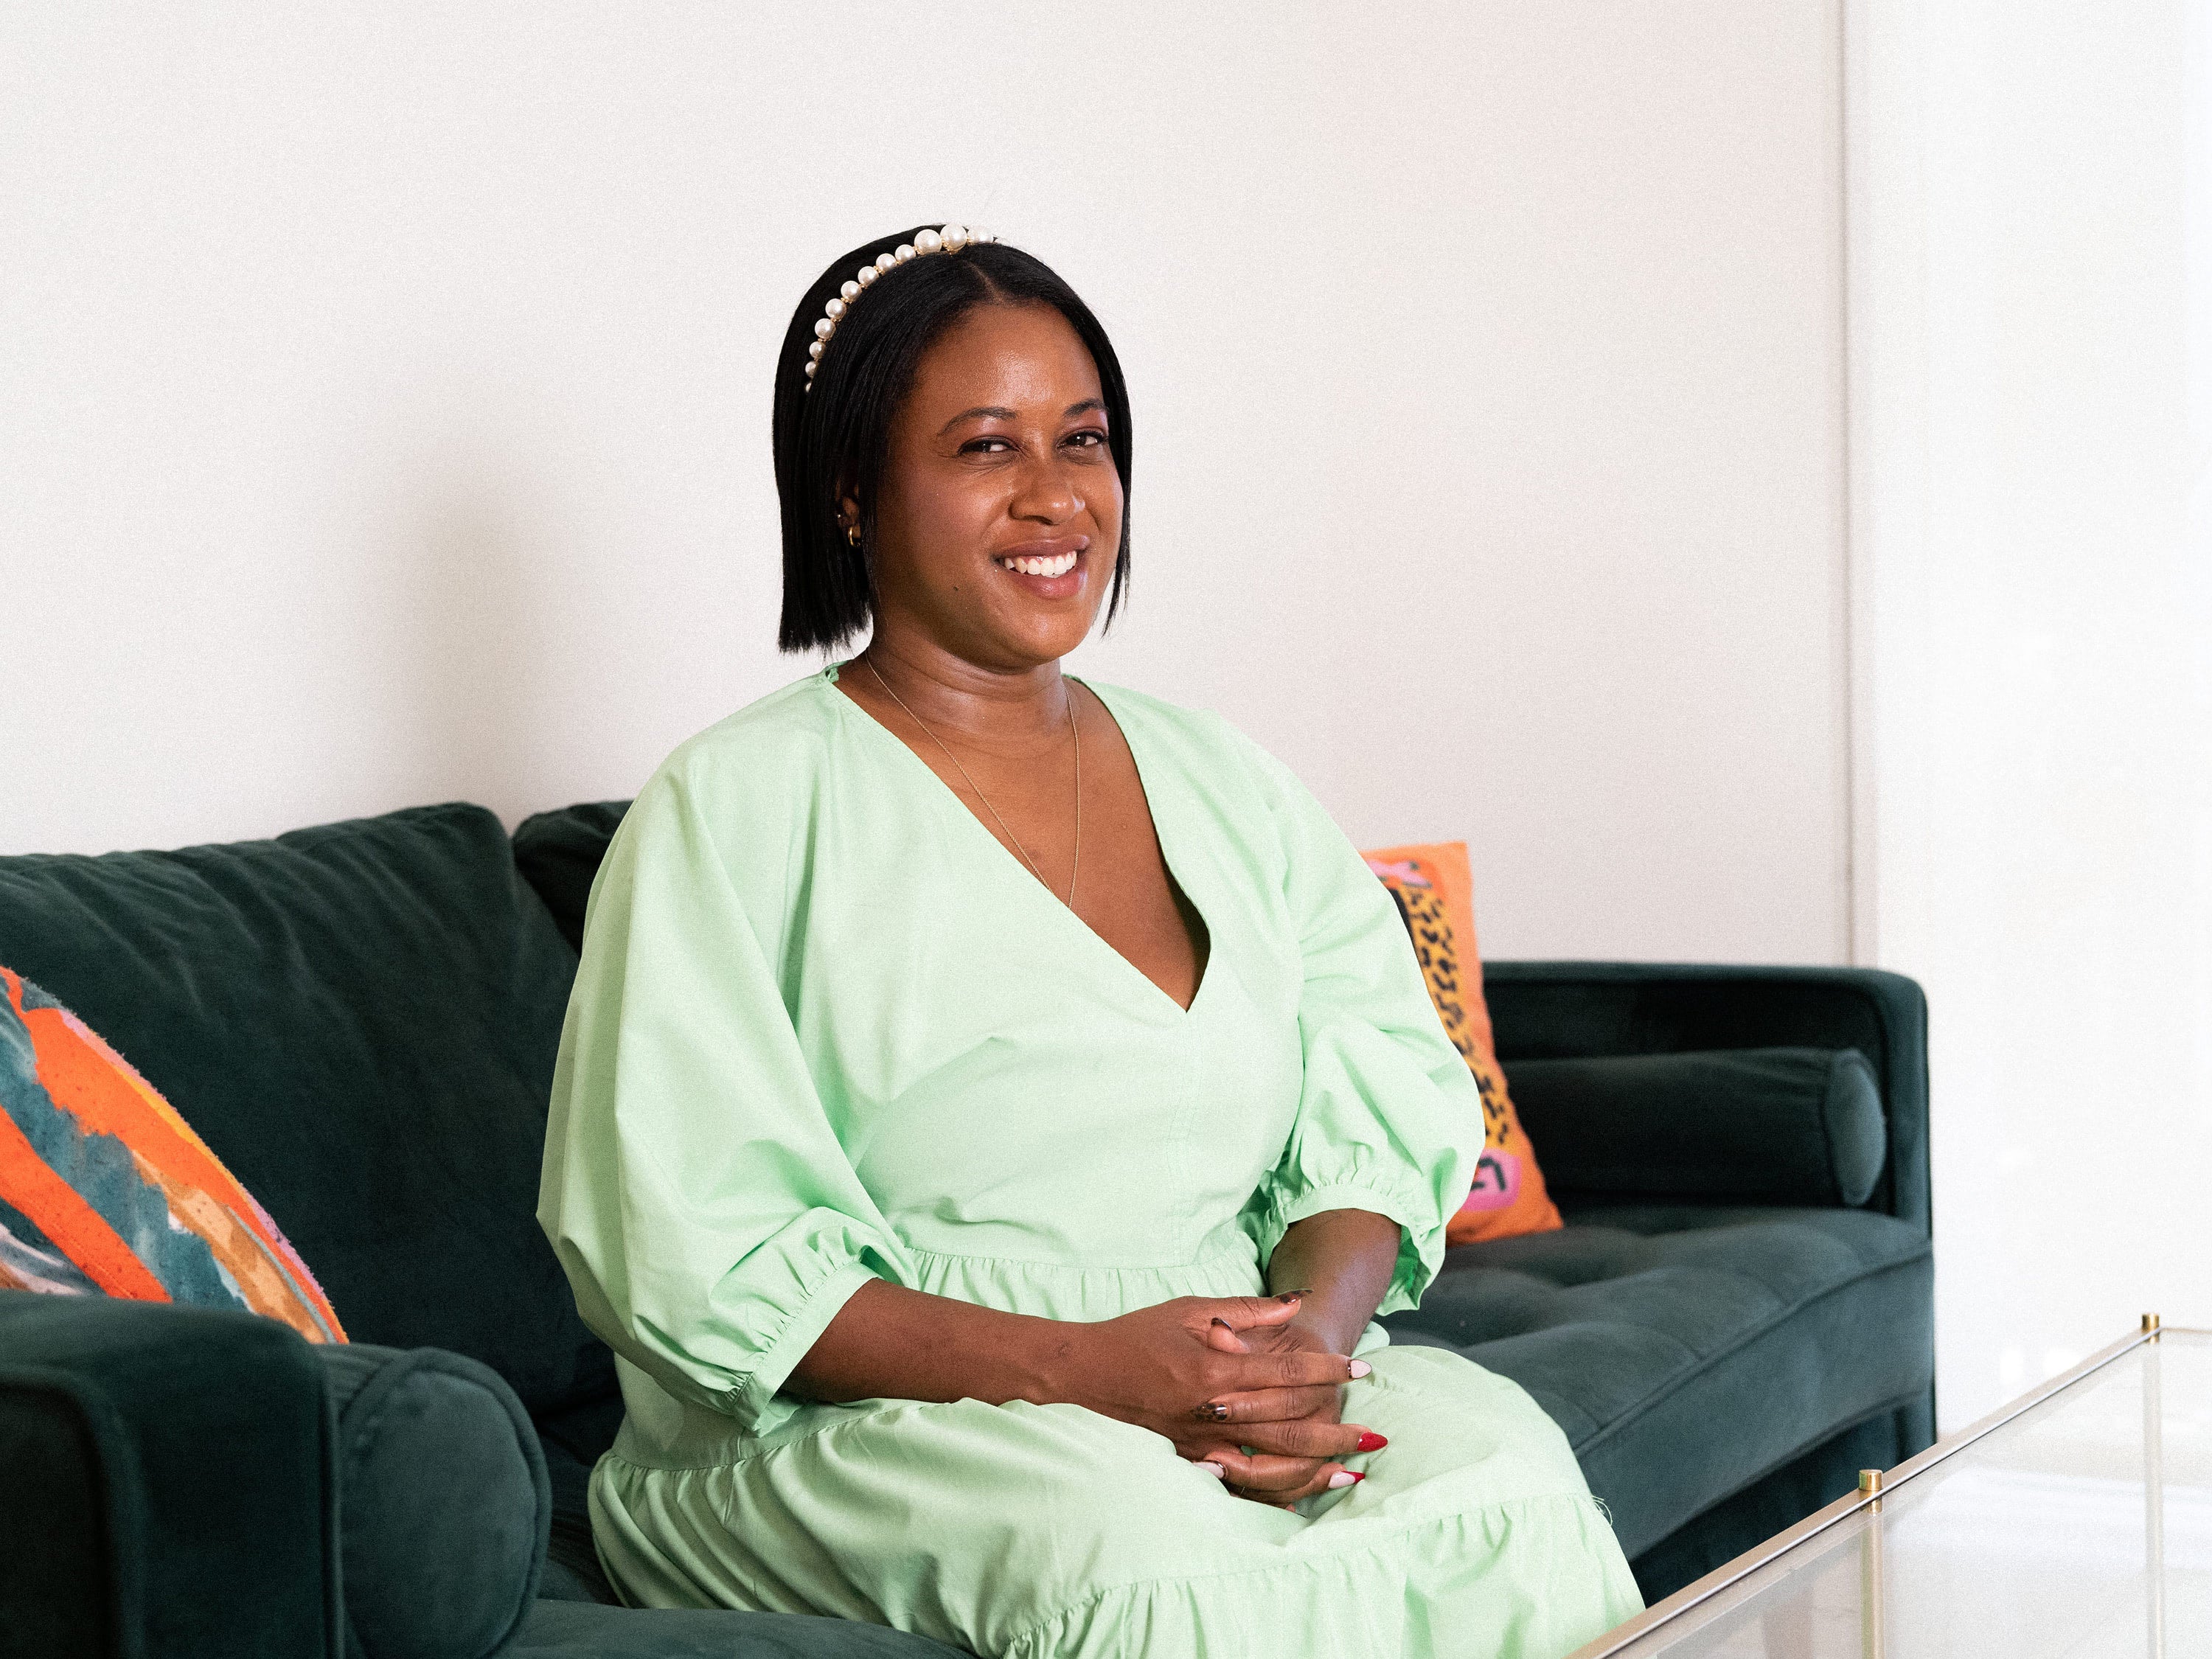 Maryam Ajayi, the founder of Dive in Well, sitting on her green couch and smiling.